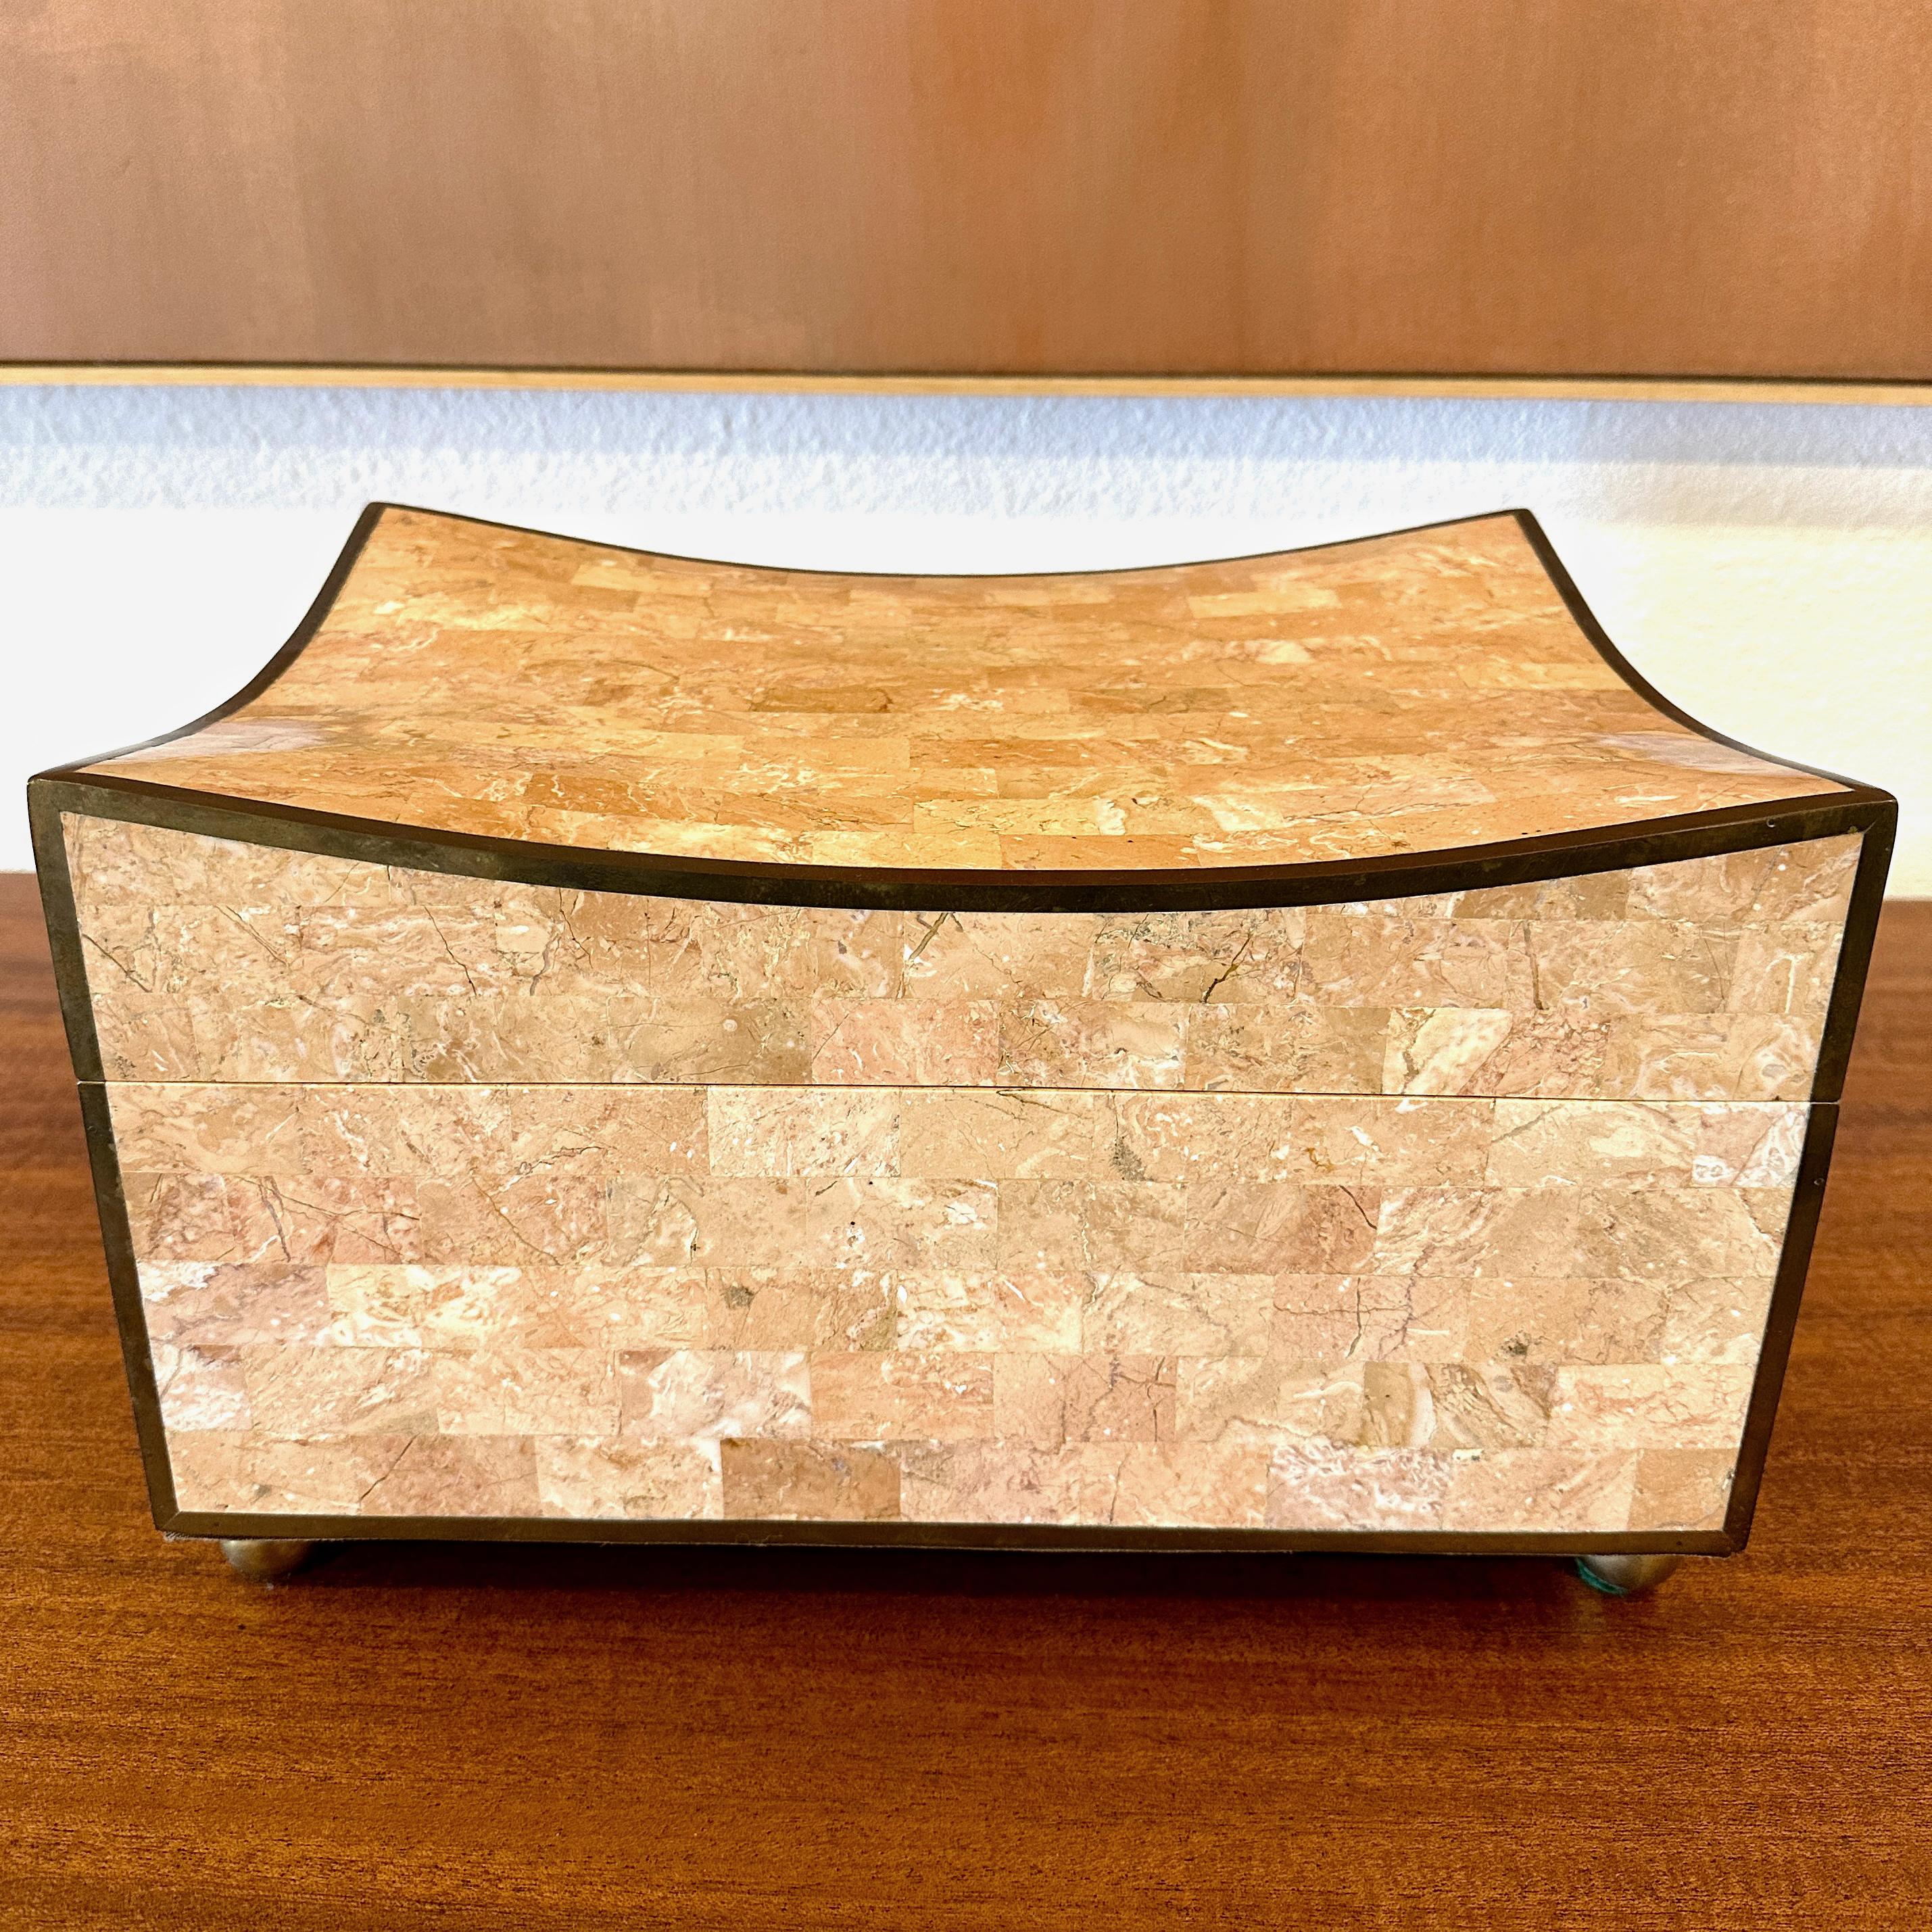 Maitland Smith Unusual Pink Tessellated Marble Box, ca 1990s.

This rectangular box is clad in a beautiful tessellated pink marble and accented with a brass inlay along all the face of all the edges that has aged to a mellowed tone.  The lid has